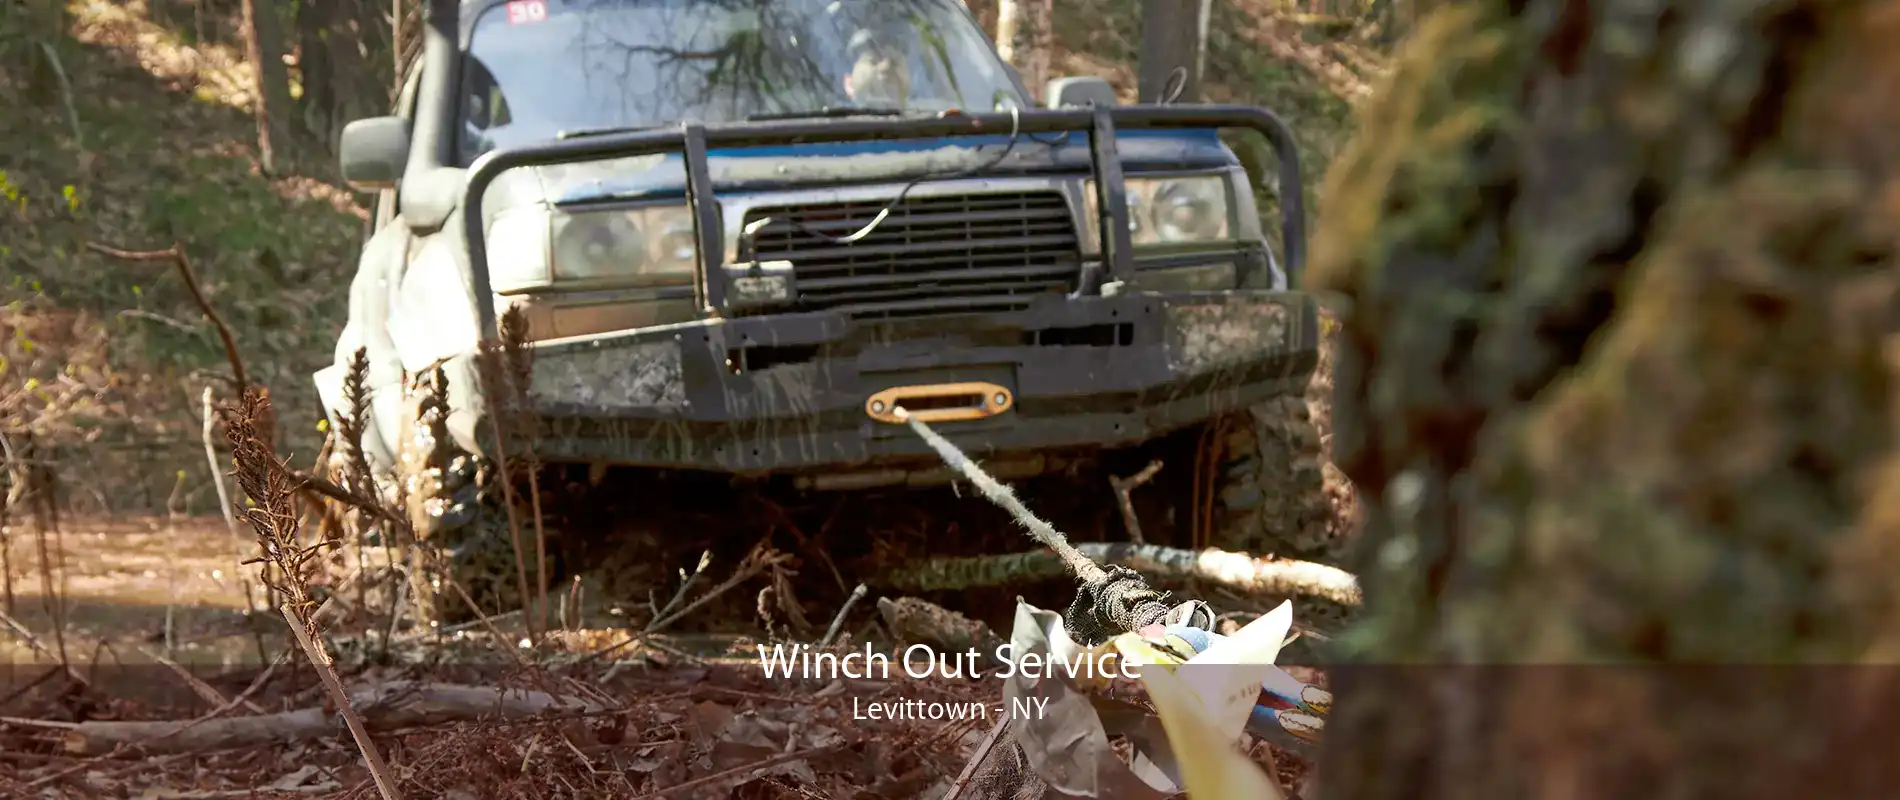 Winch Out Service Levittown - NY